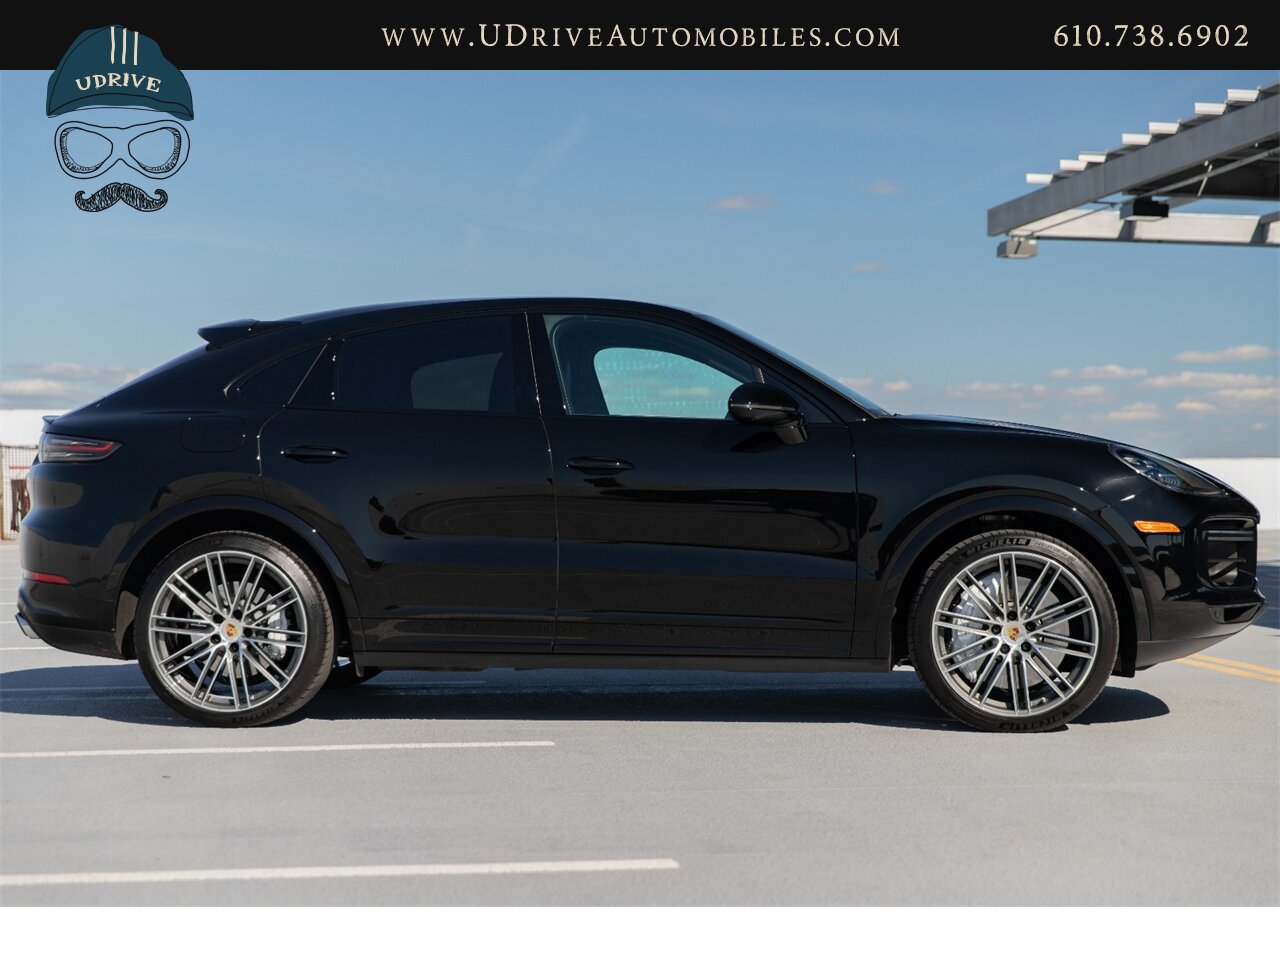 2020 Porsche Cayenne Turbo Coupe 2+1 Rear Comf Seats Prem Plus  22in Turbo Design Whls Sport Exhst Adap Cruise Surround View - Photo 16 - West Chester, PA 19382